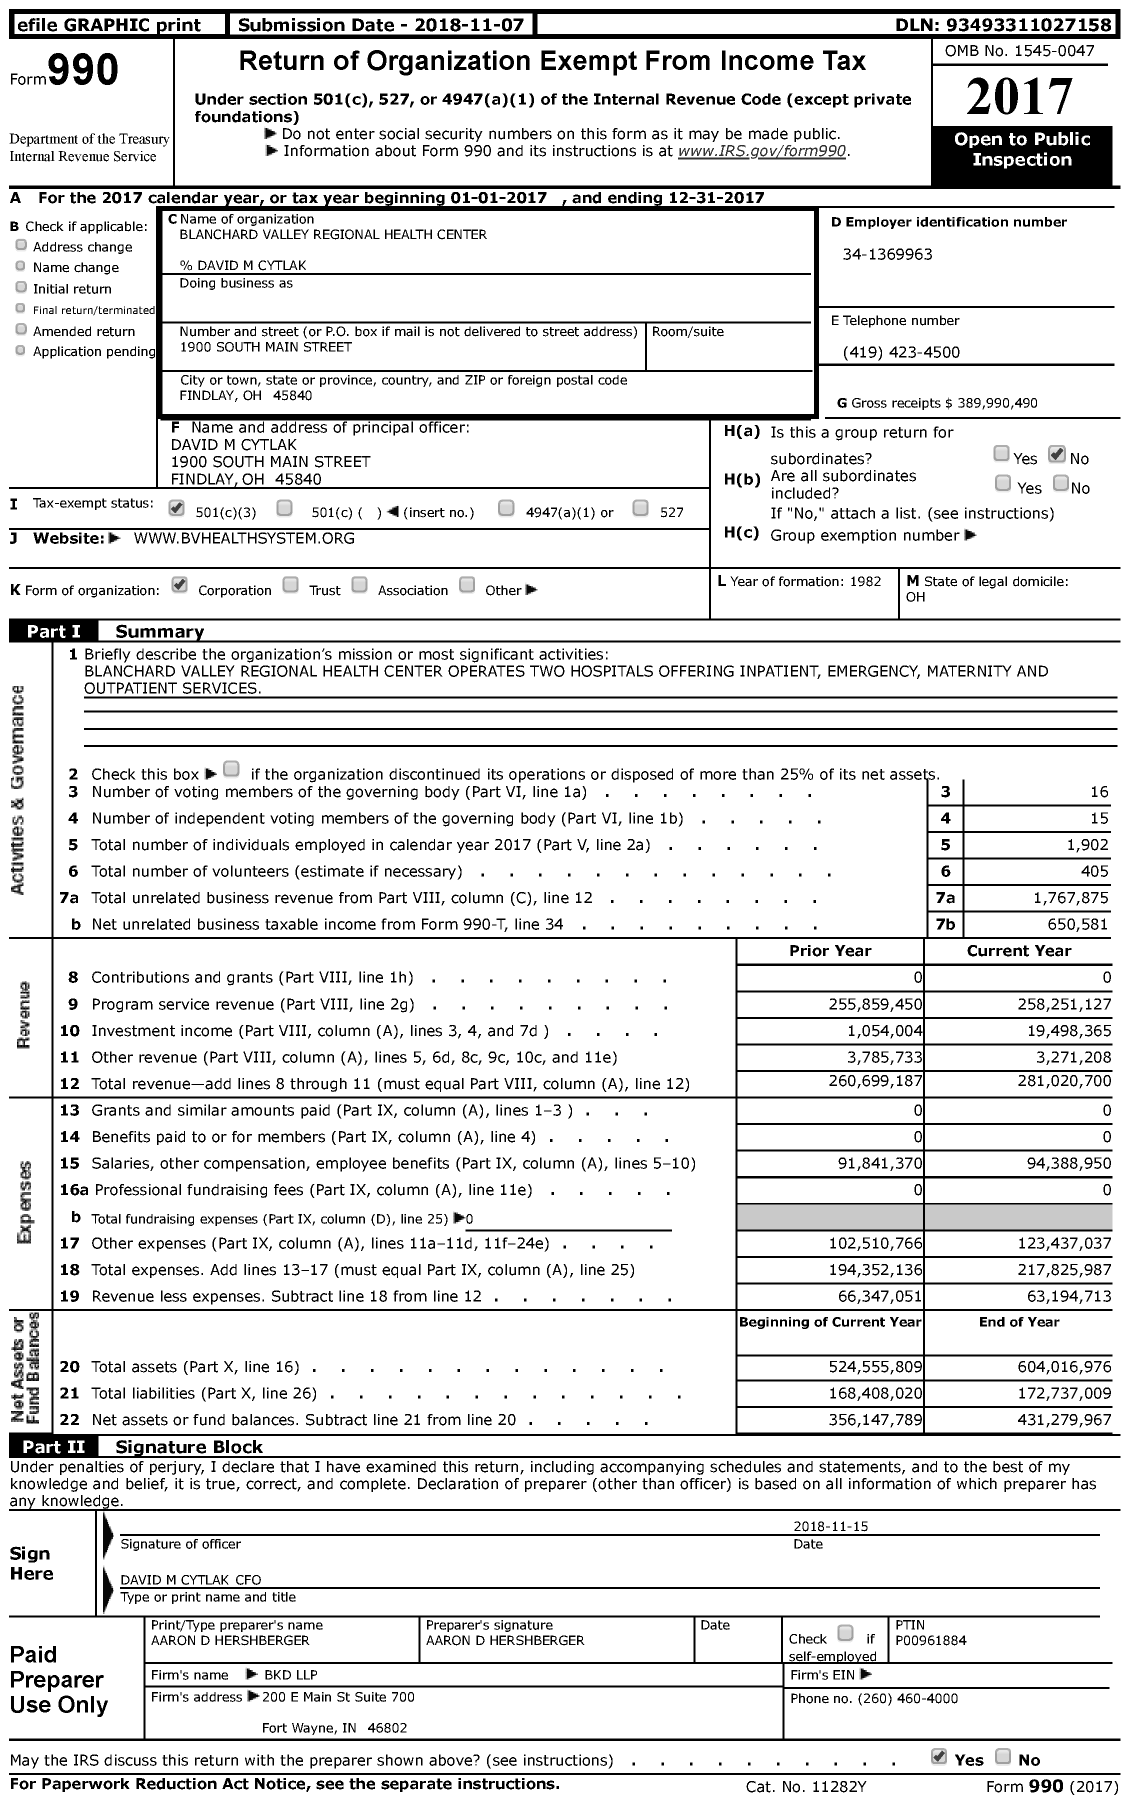 Image of first page of 2017 Form 990 for Blanchard Valley Regional Health Center (BVHS)